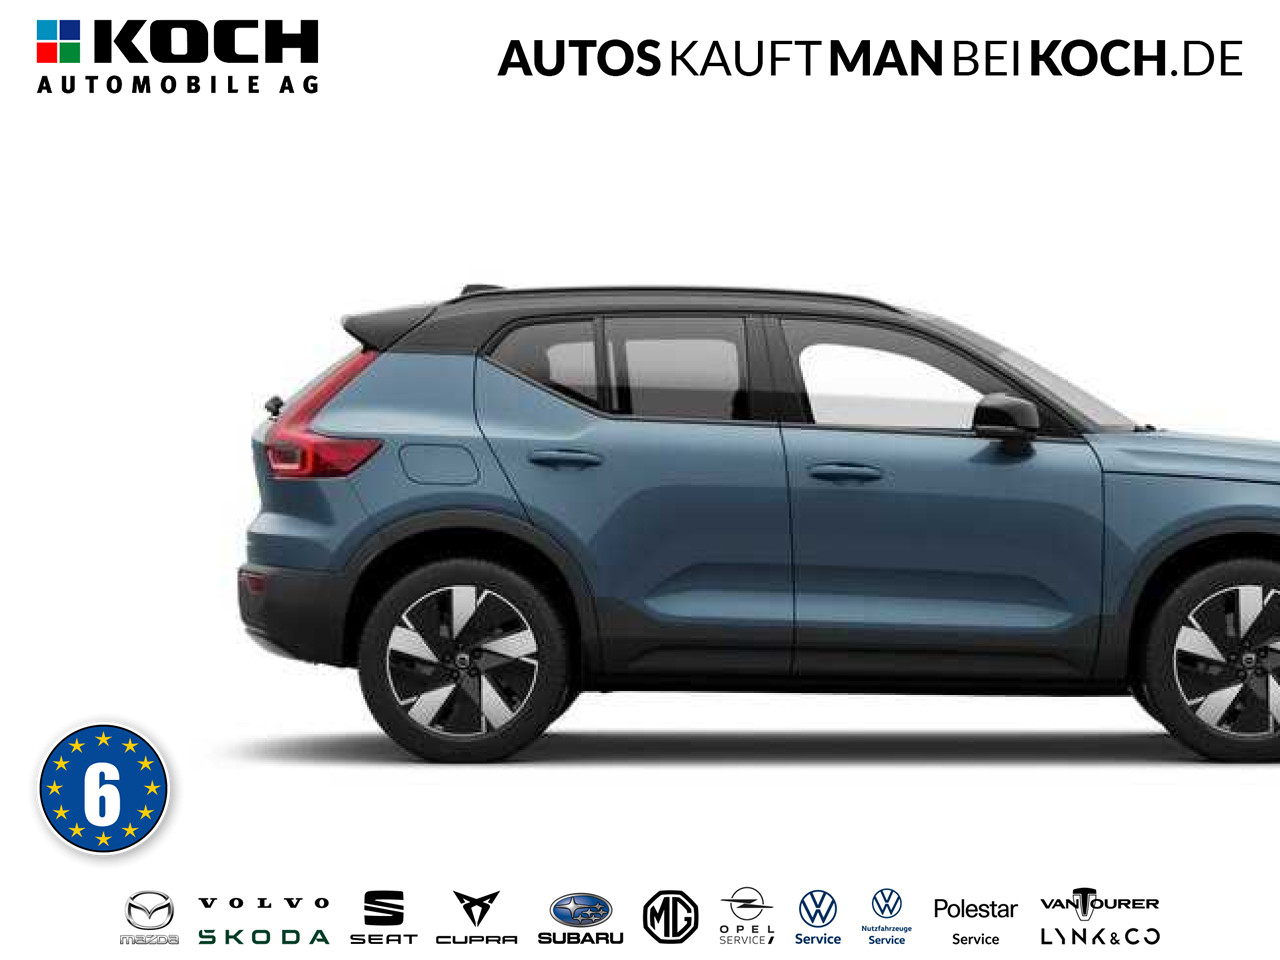 Volvo XC40 Recharge h Single M Extended Range RWD